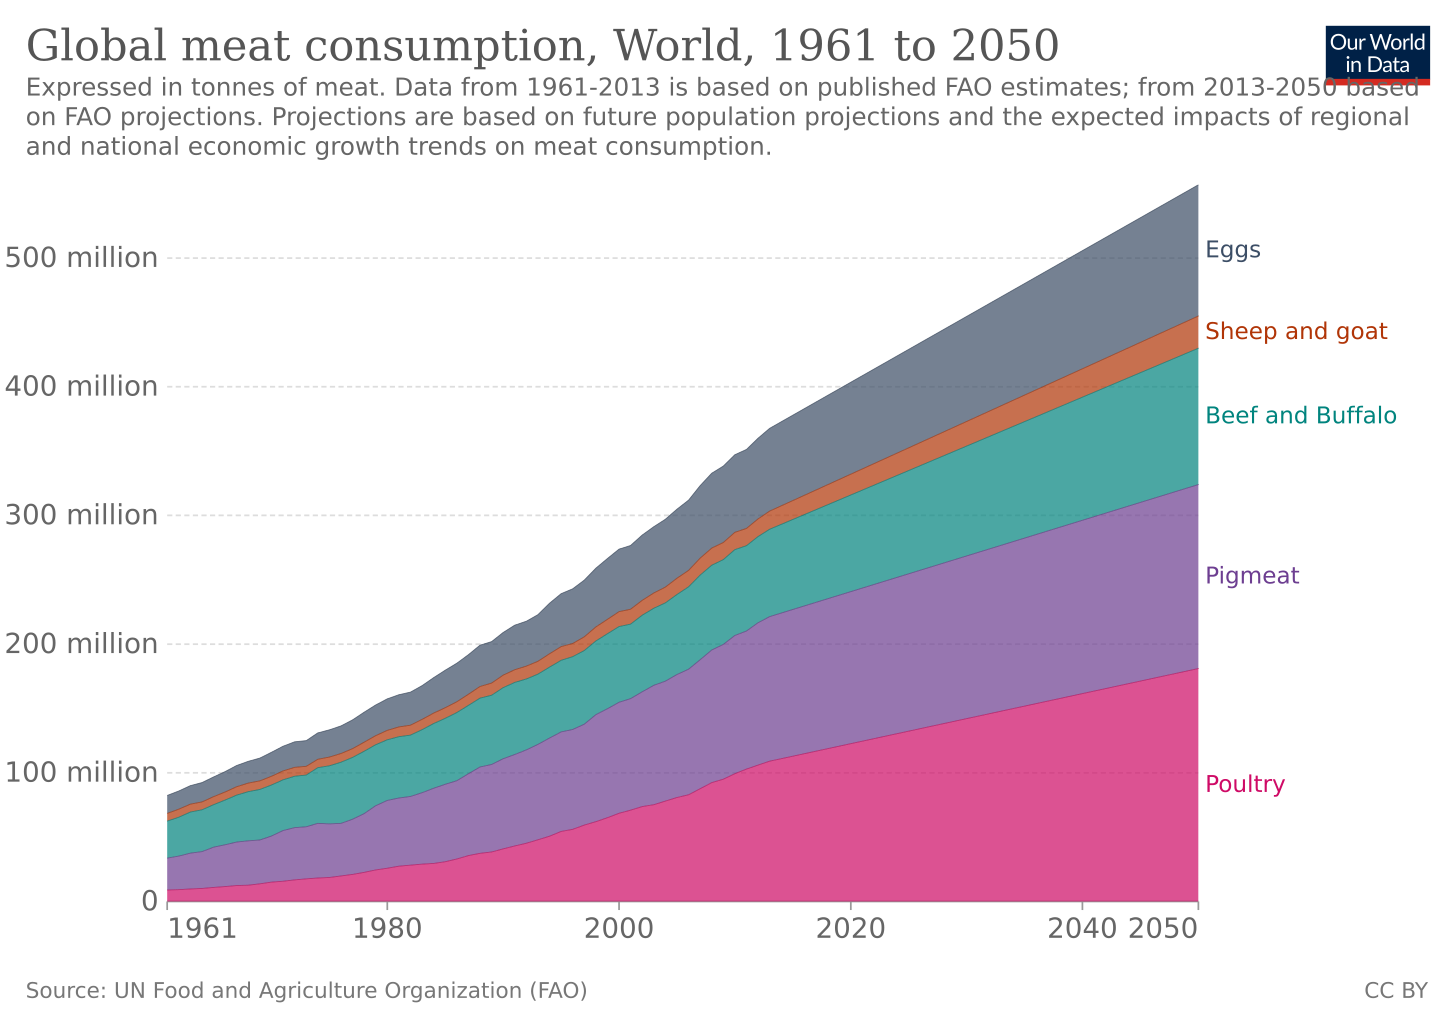 Global meat consumption, World, 1961 to 2050